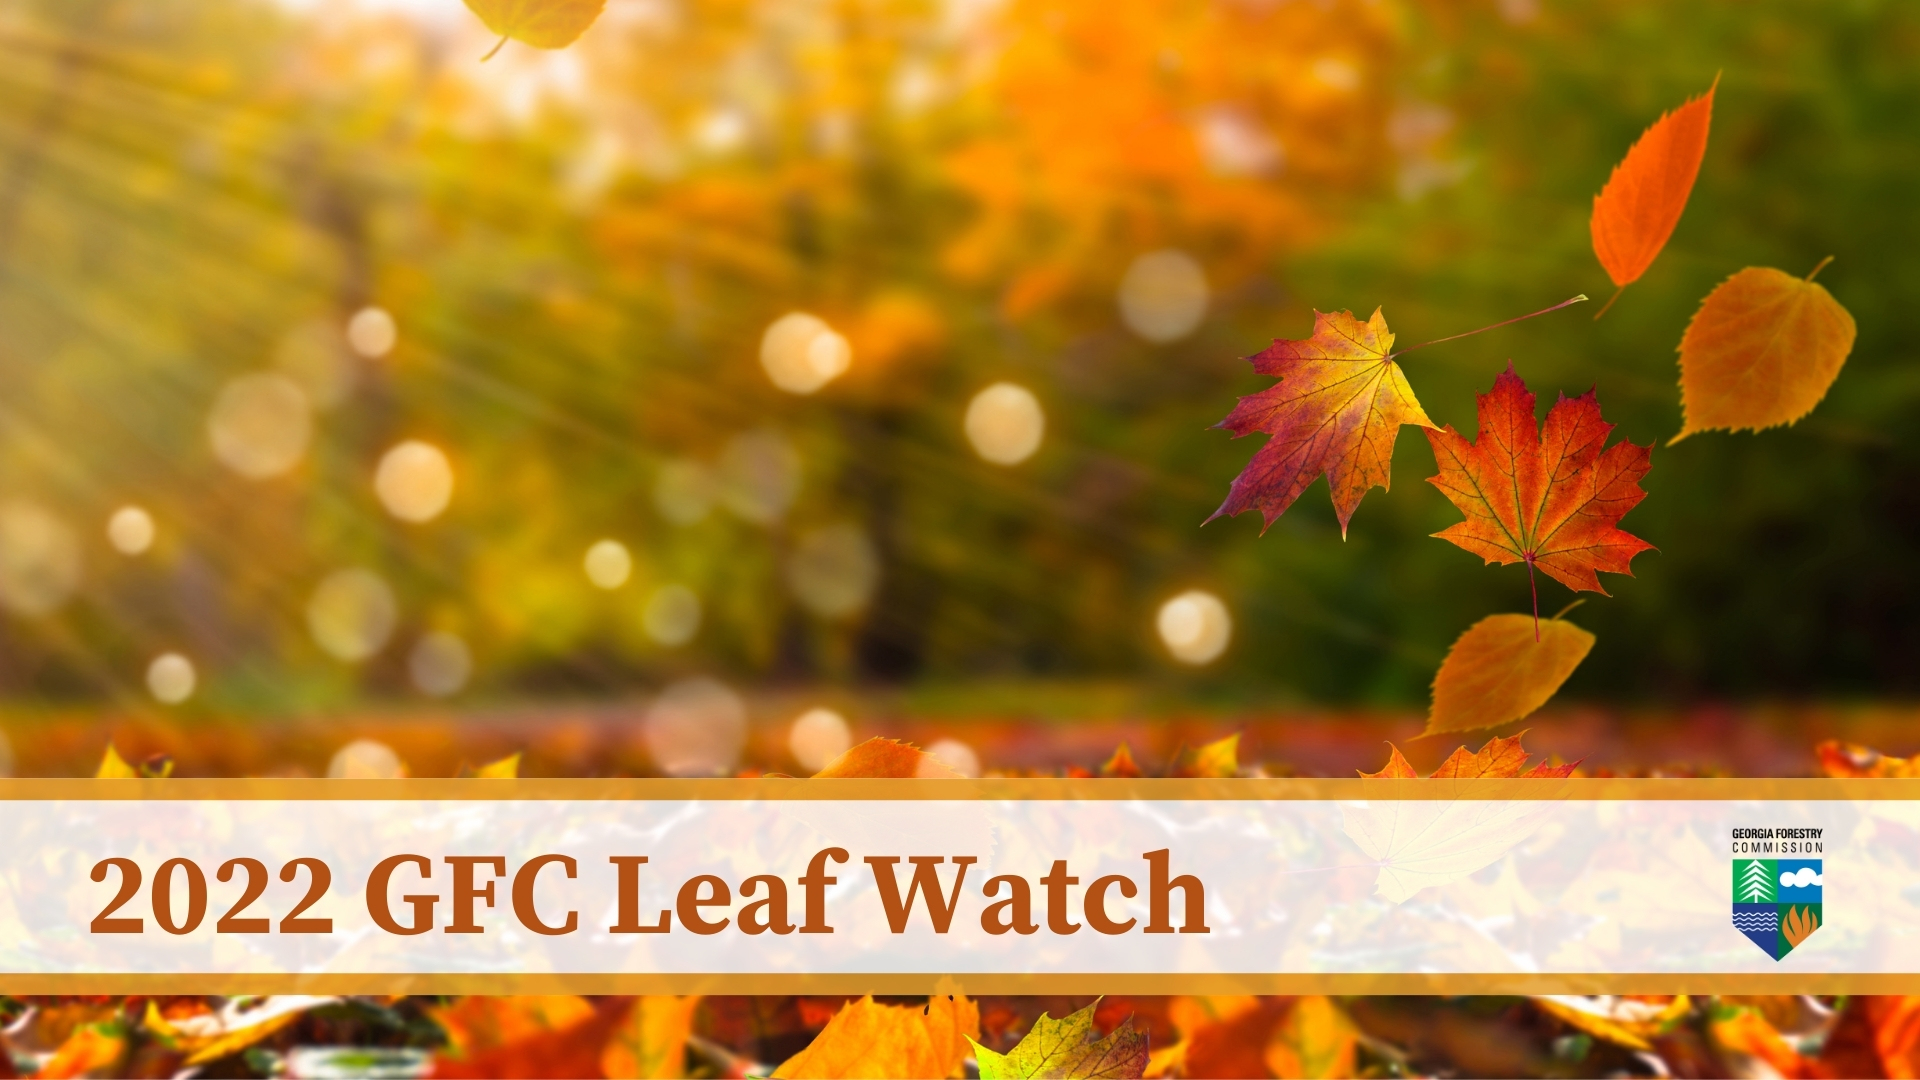 GFC Leaf Watch Forestry Commission